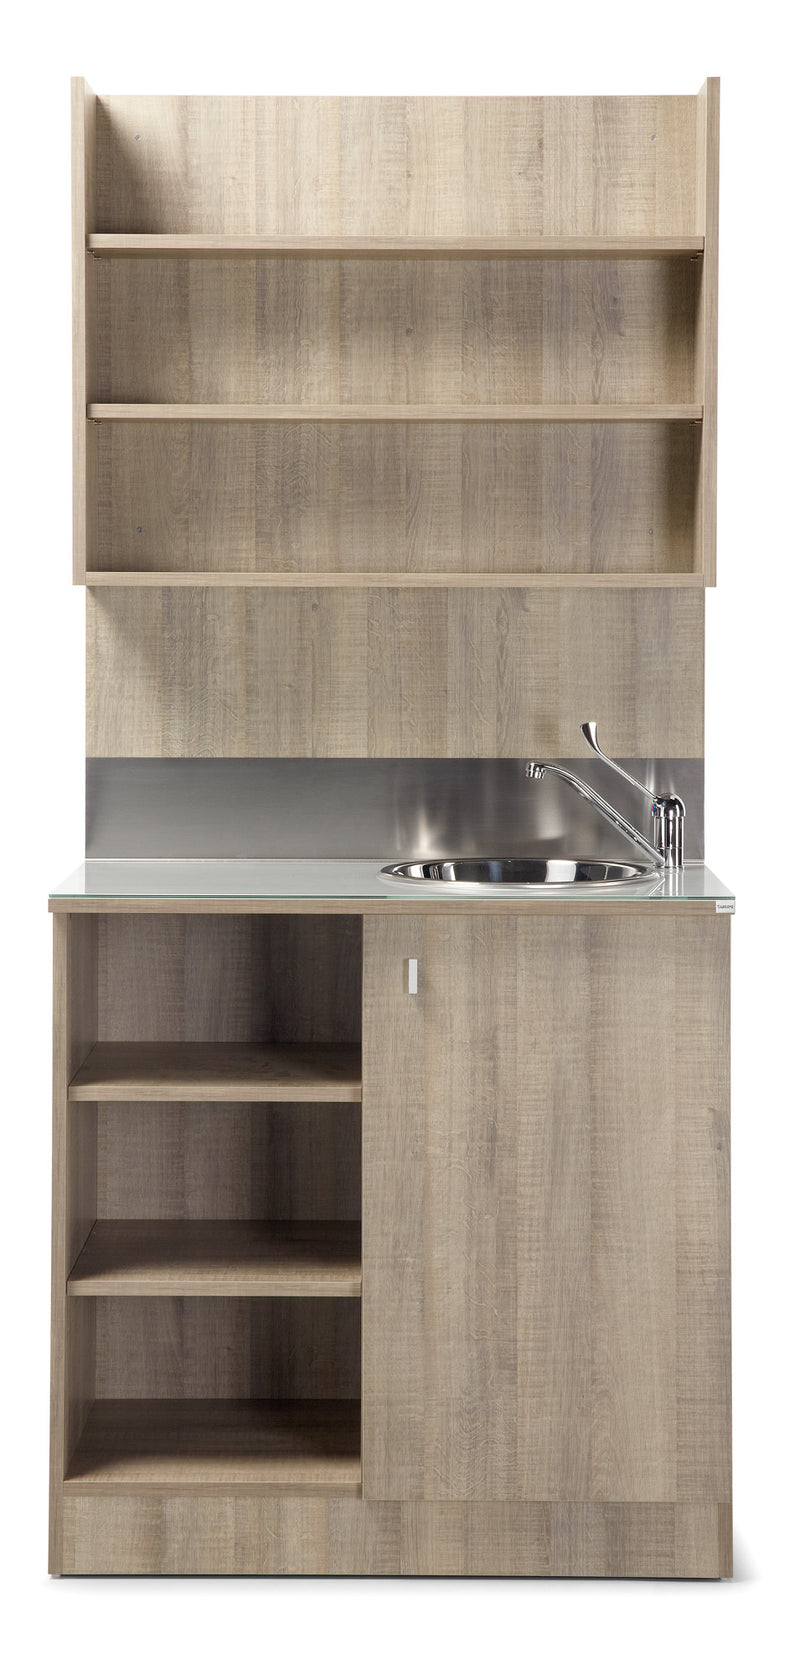 Cara Collection Mixing Corner with Washbasin & Tap Labo